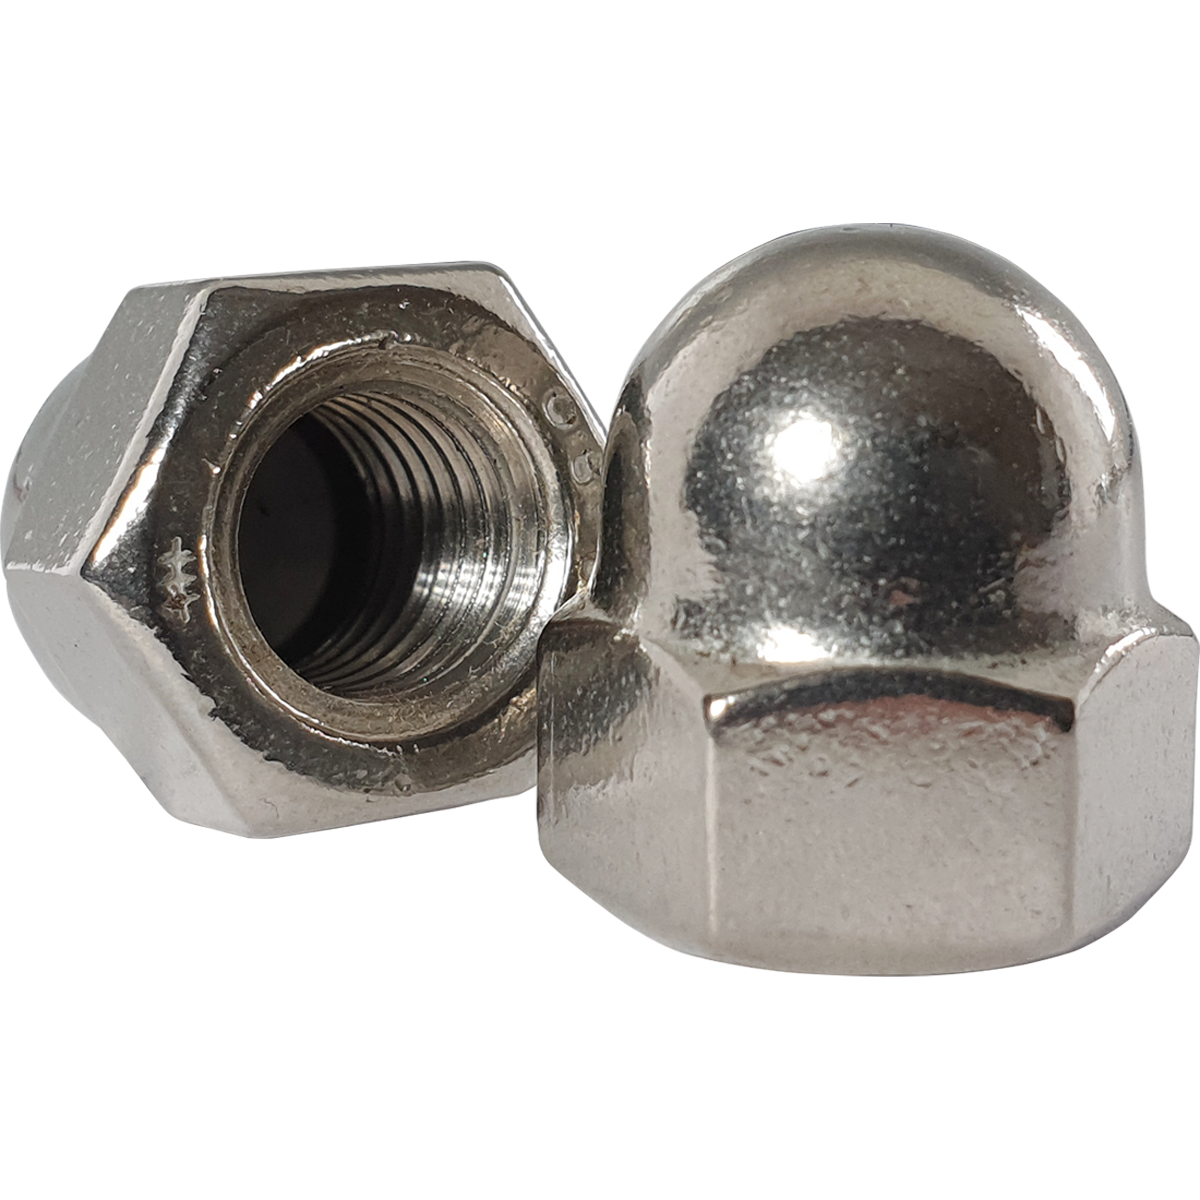 Great prices on corrosion resistant, A4 stainless steel dome head nuts. A hexagonal nut with a dome shape on one side. Also known as acorn nuts or capped nuts.